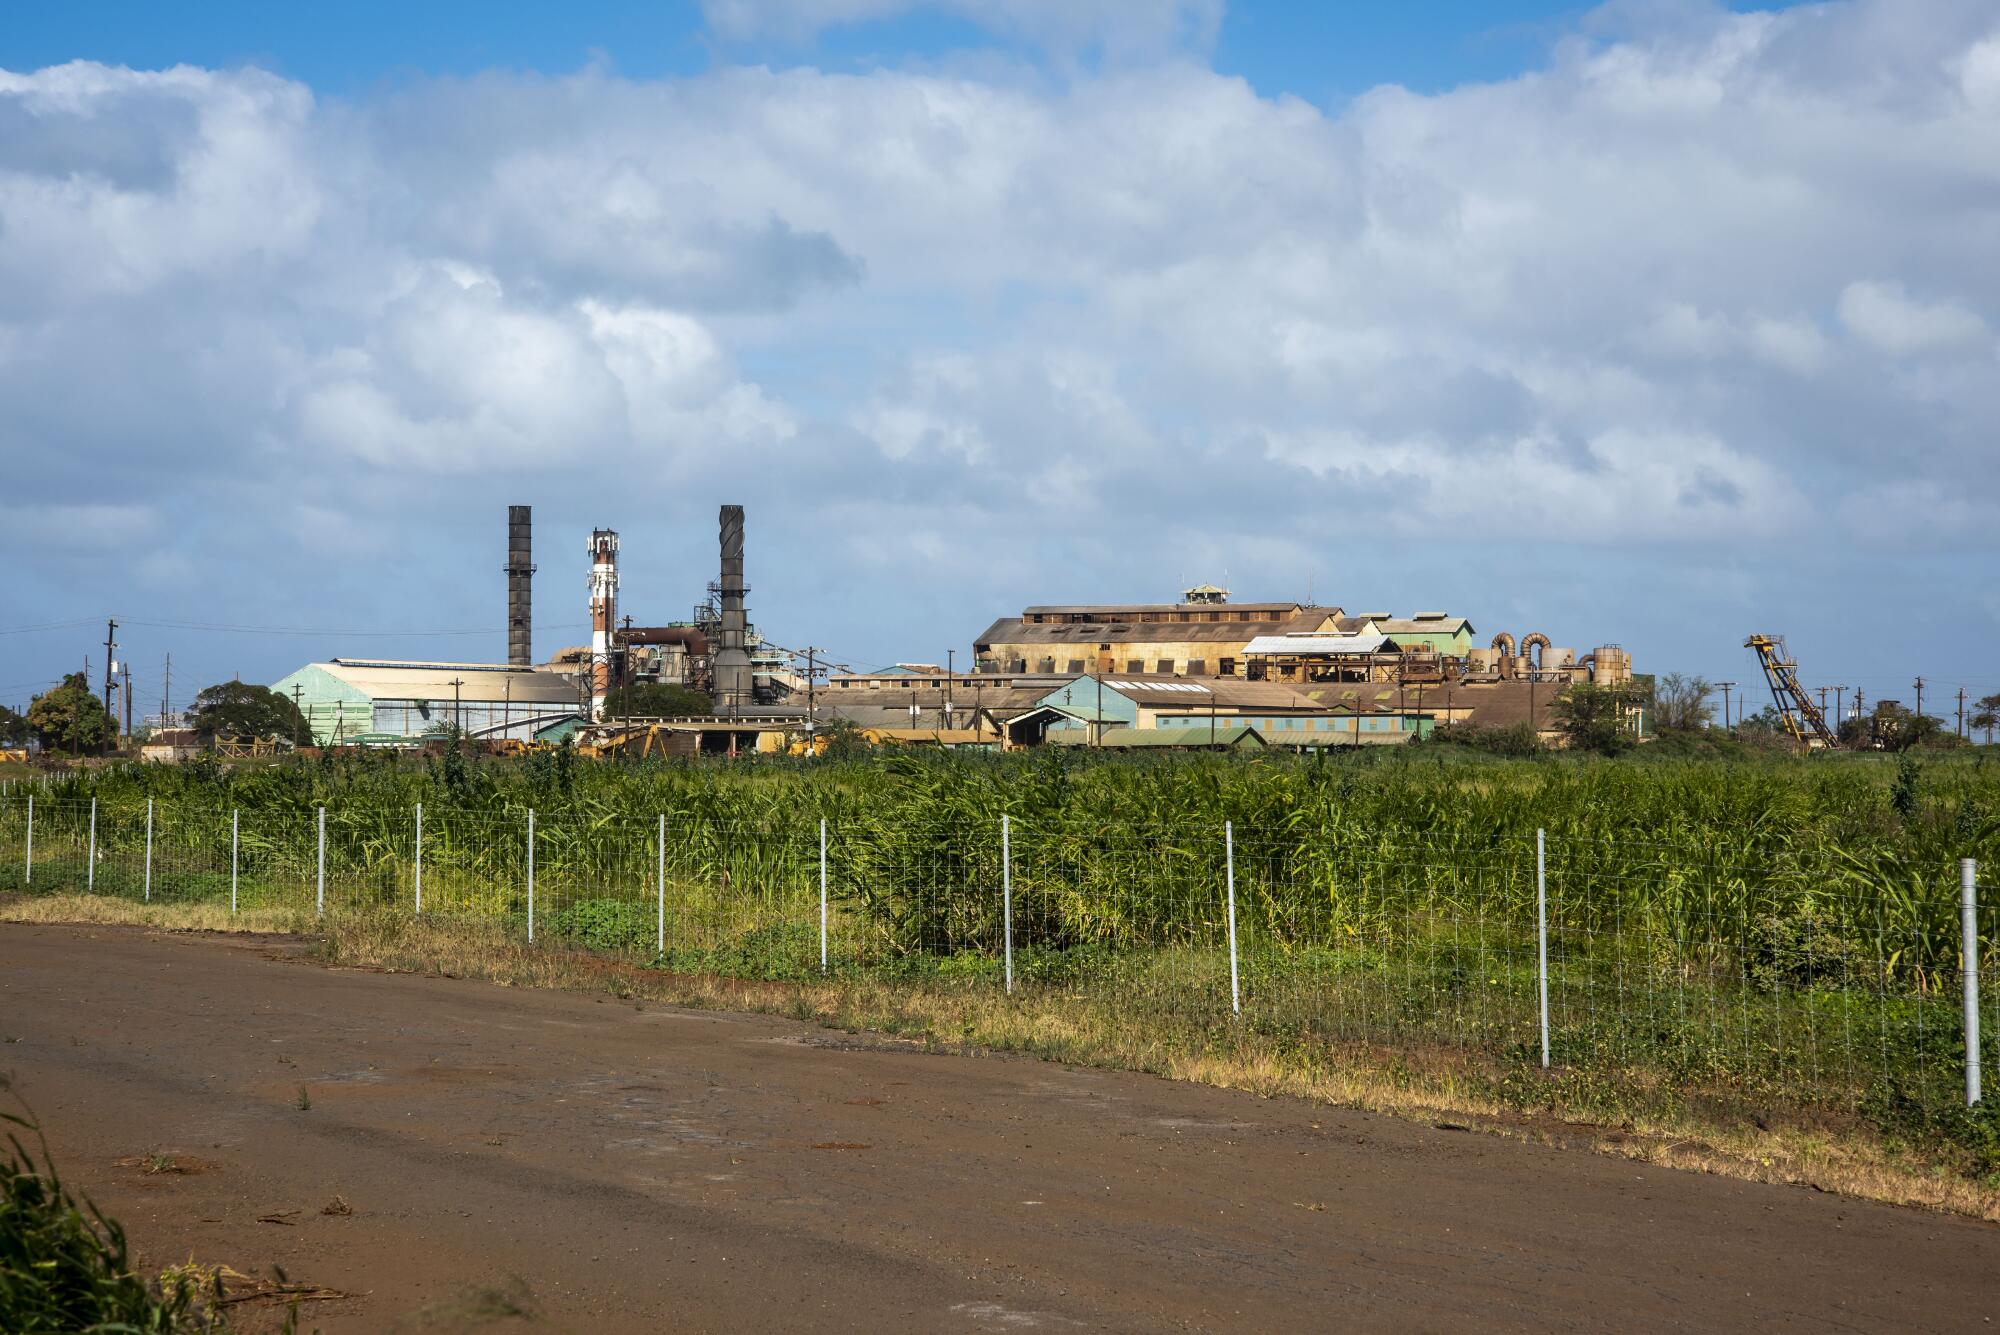 An industrial facility rises behind thick vegetation.